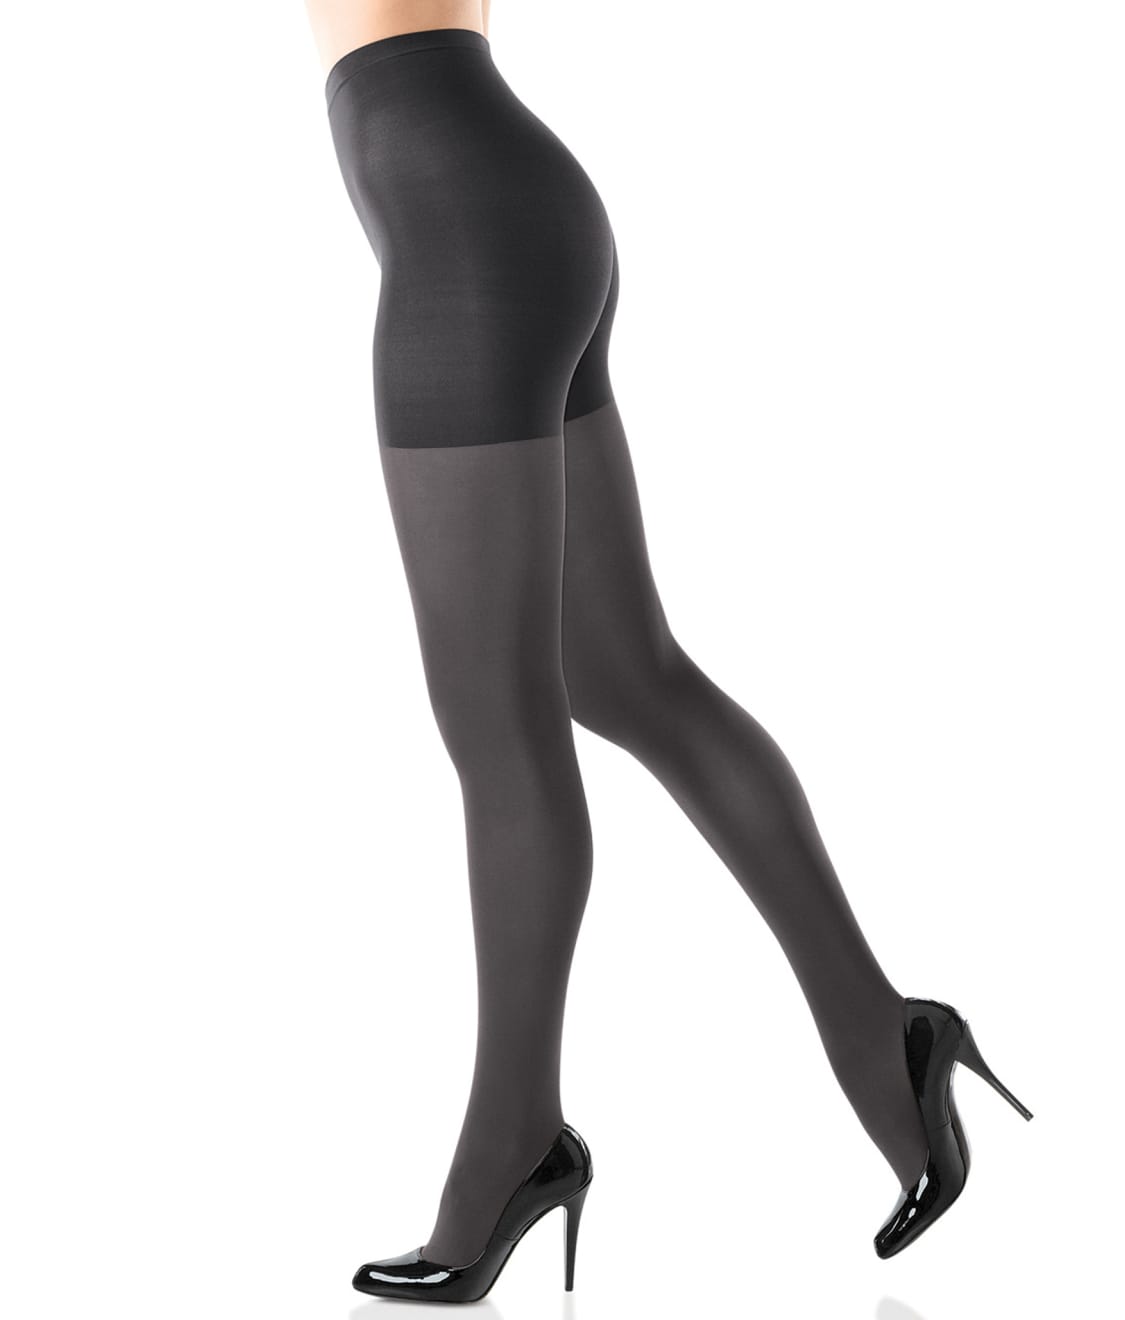 Types of Tights & Tight Styles for Every Body Type